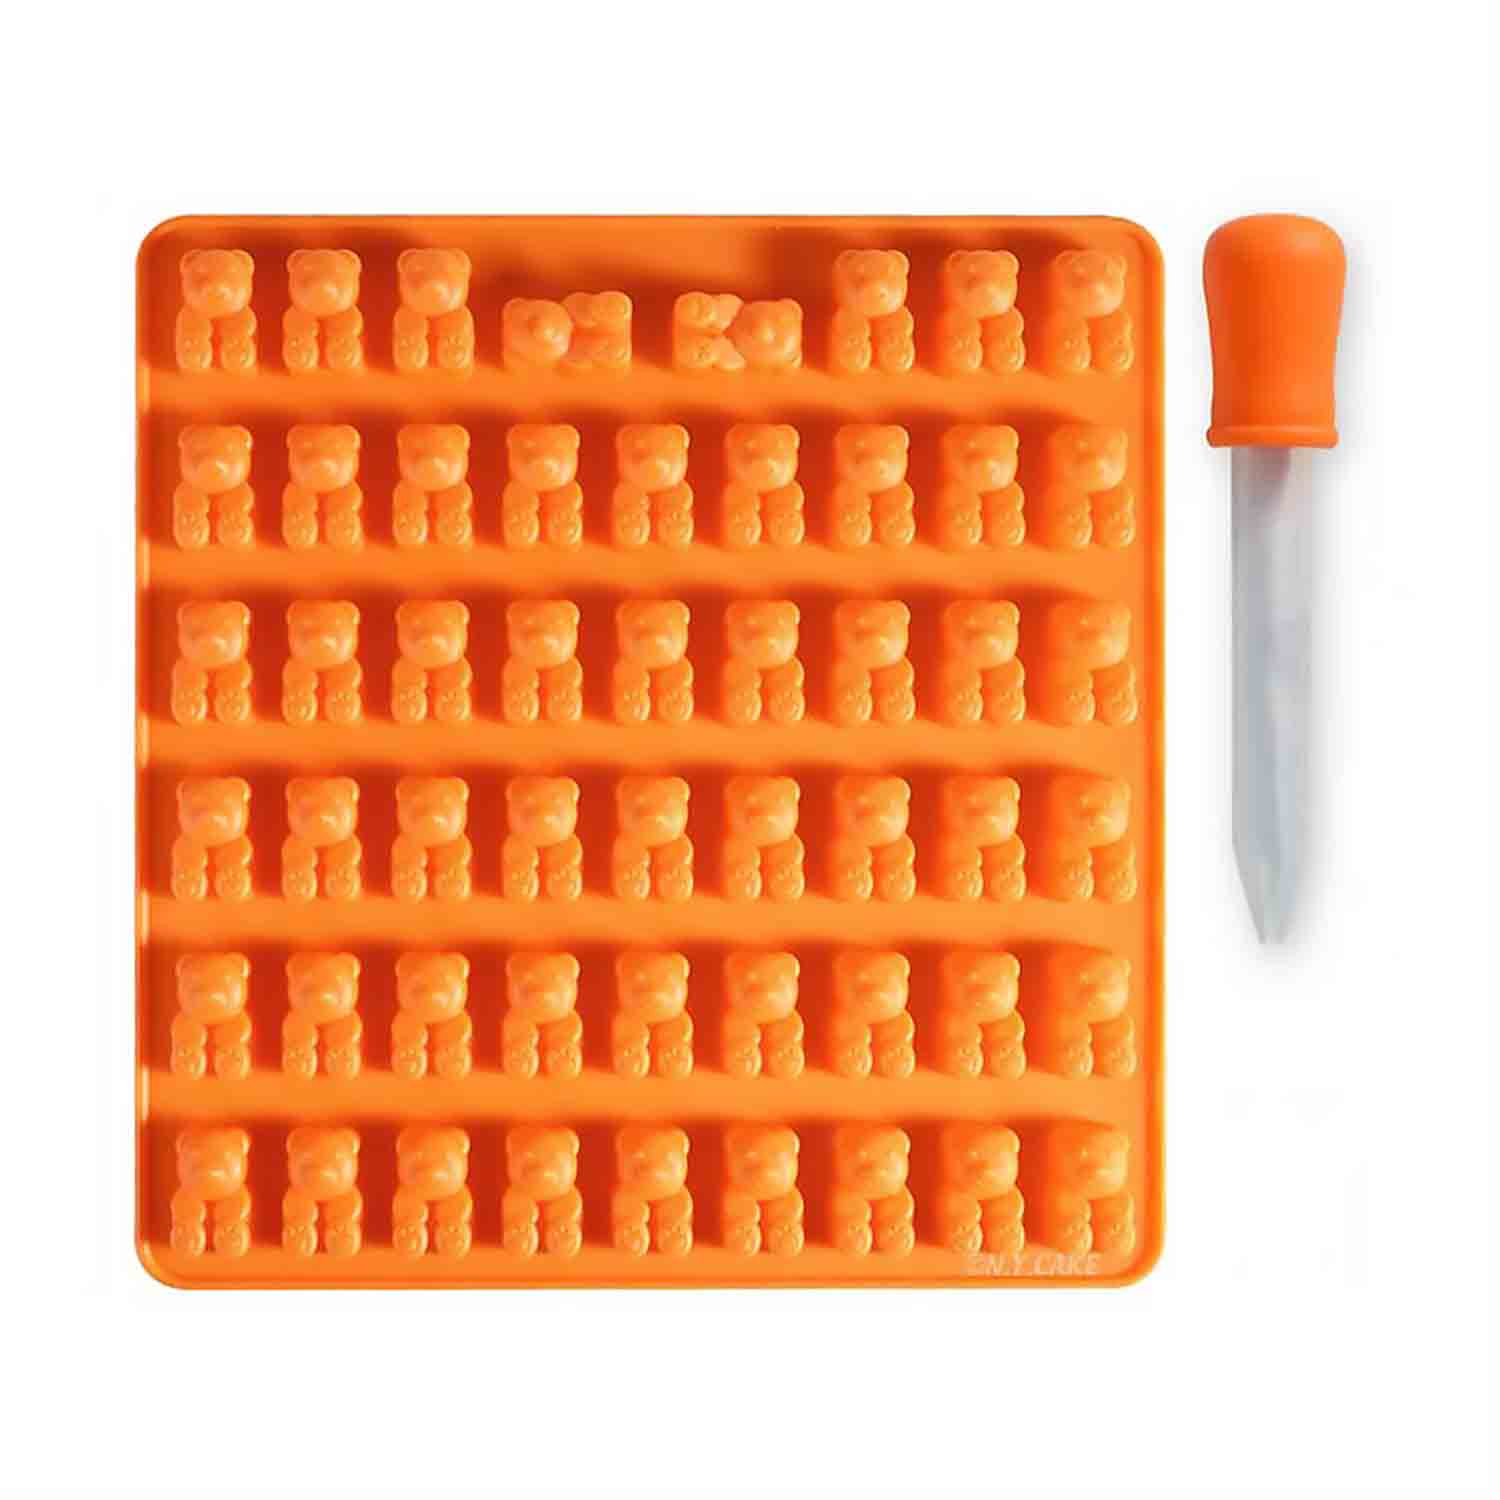 Mini Bear Silicone Mold With Dropper - Confectionery House